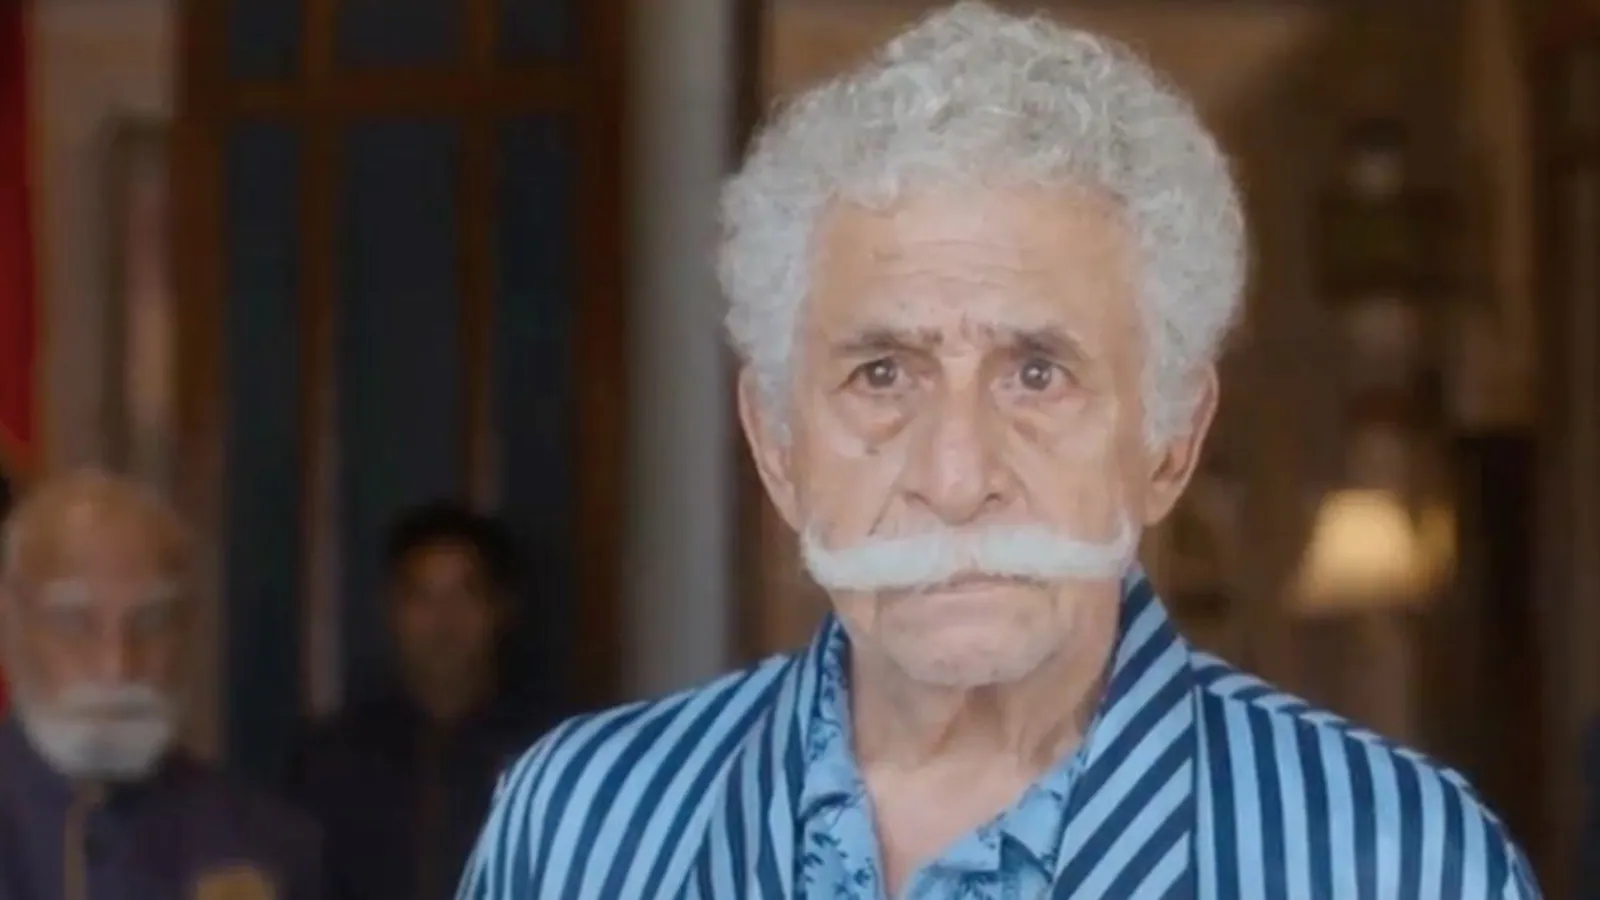 Naseeruddin Shah says he suffers from a condition called onomatomania. Here’s what it means